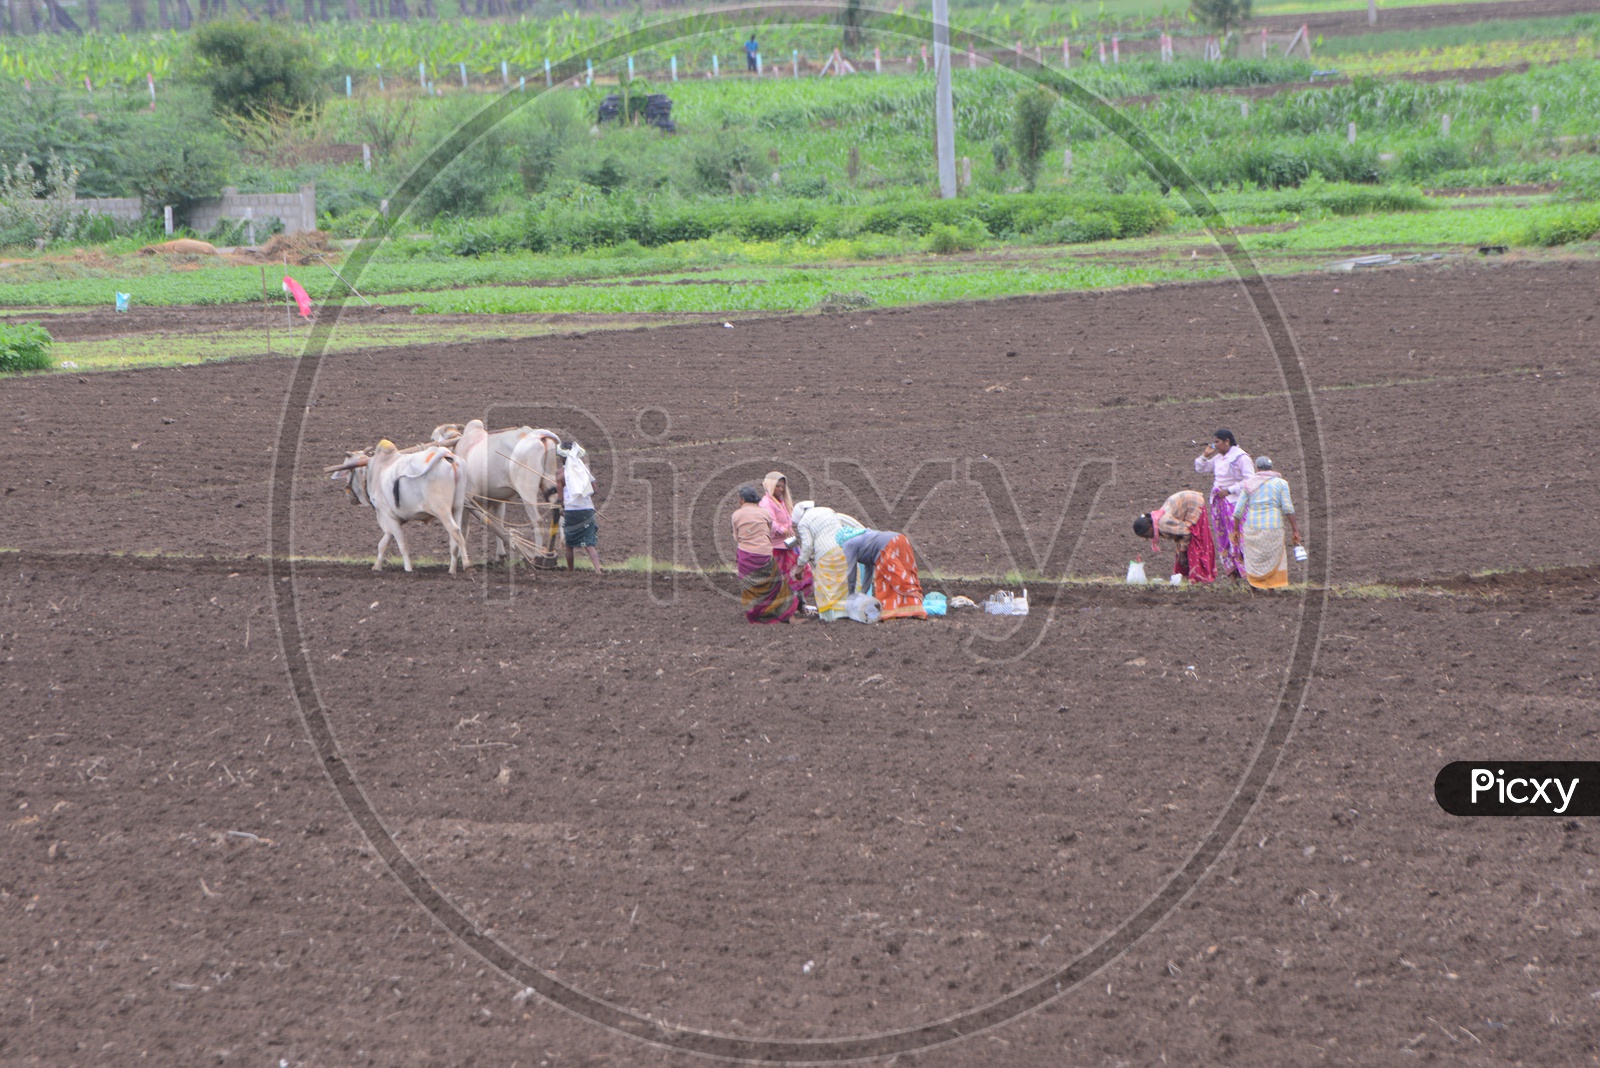 Farmers busy in Farming/Agriculture